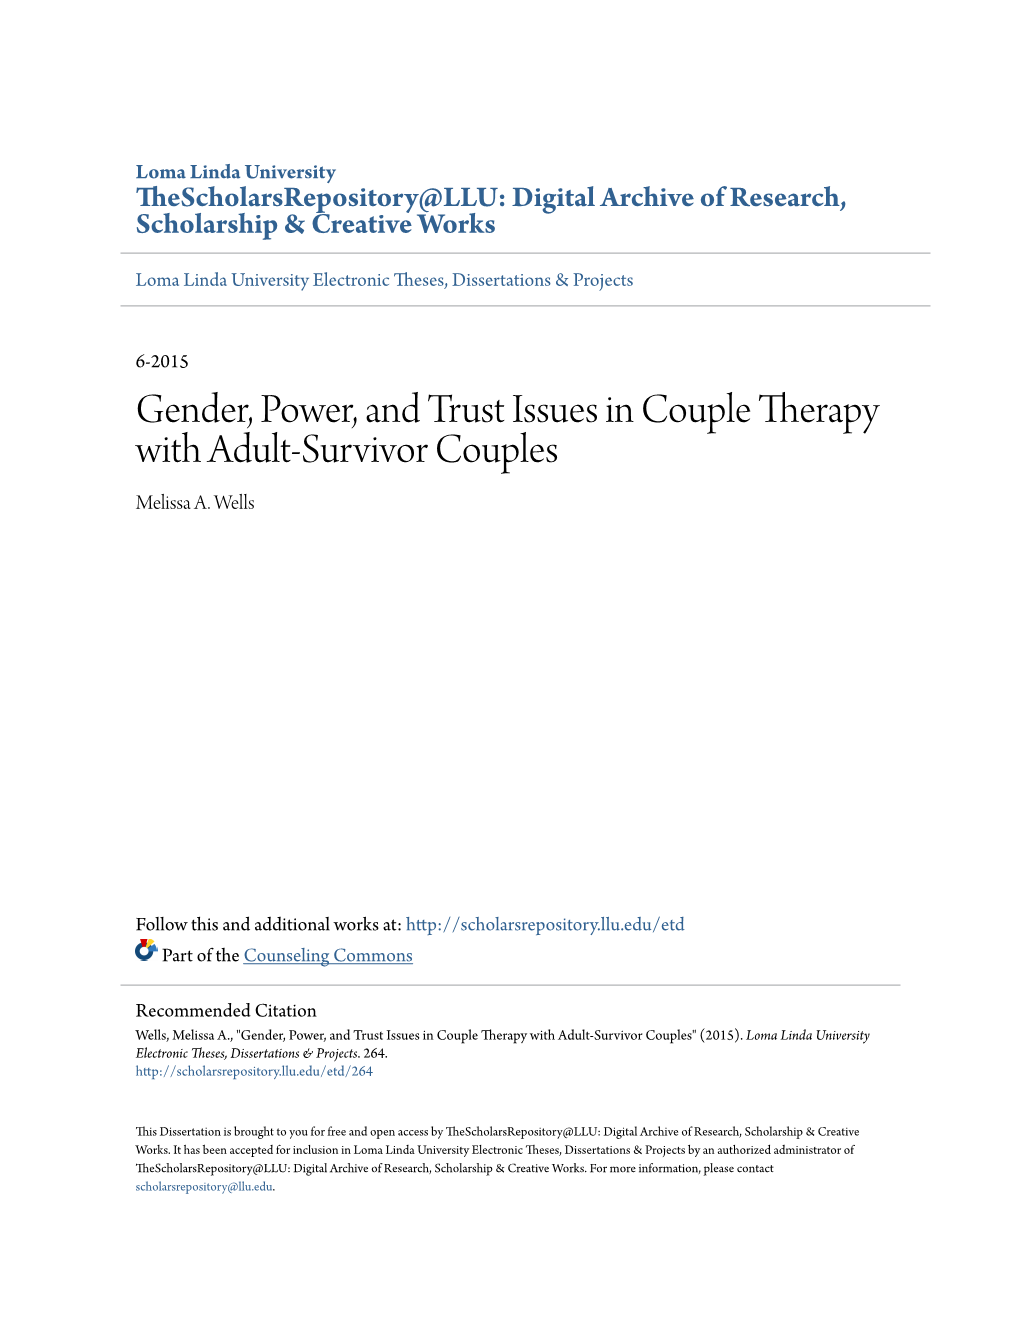 Gender, Power, and Trust Issues in Couple Therapy with Adult-Survivor Couples Melissa A